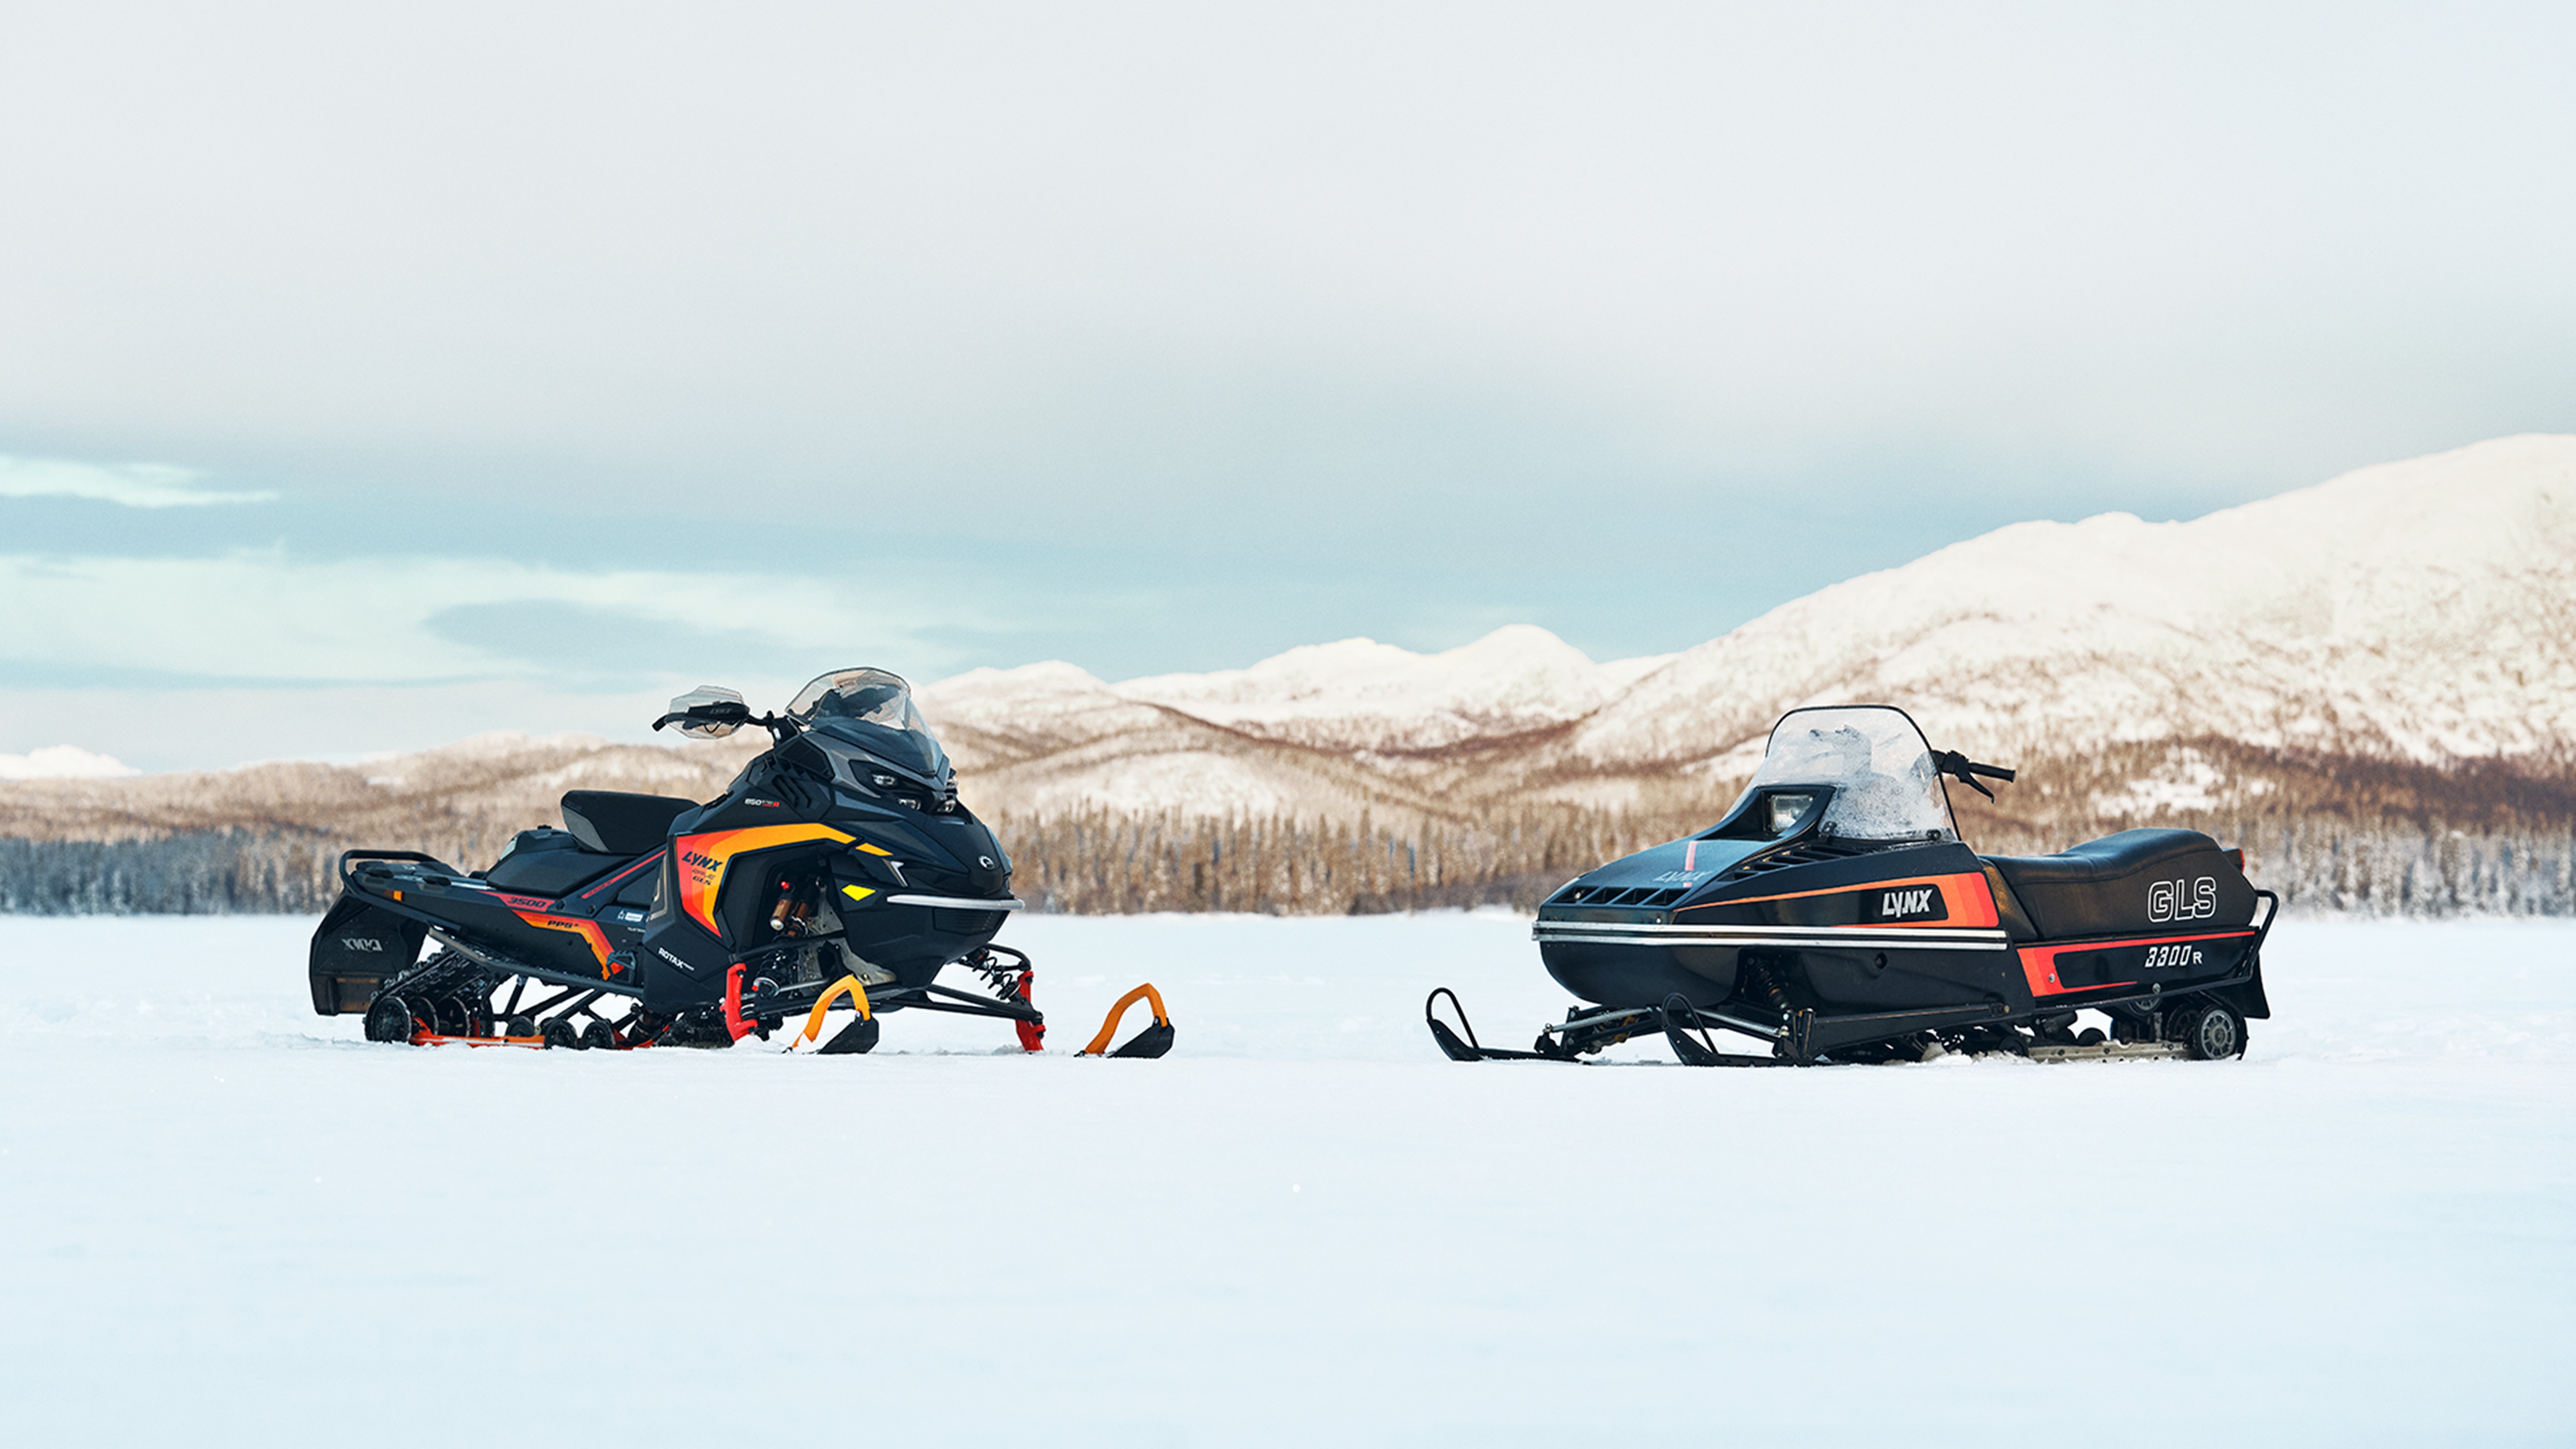 Lynx Rave GLS 2025 and retro Lynx GLS 3300 snowmobile on the lake ice